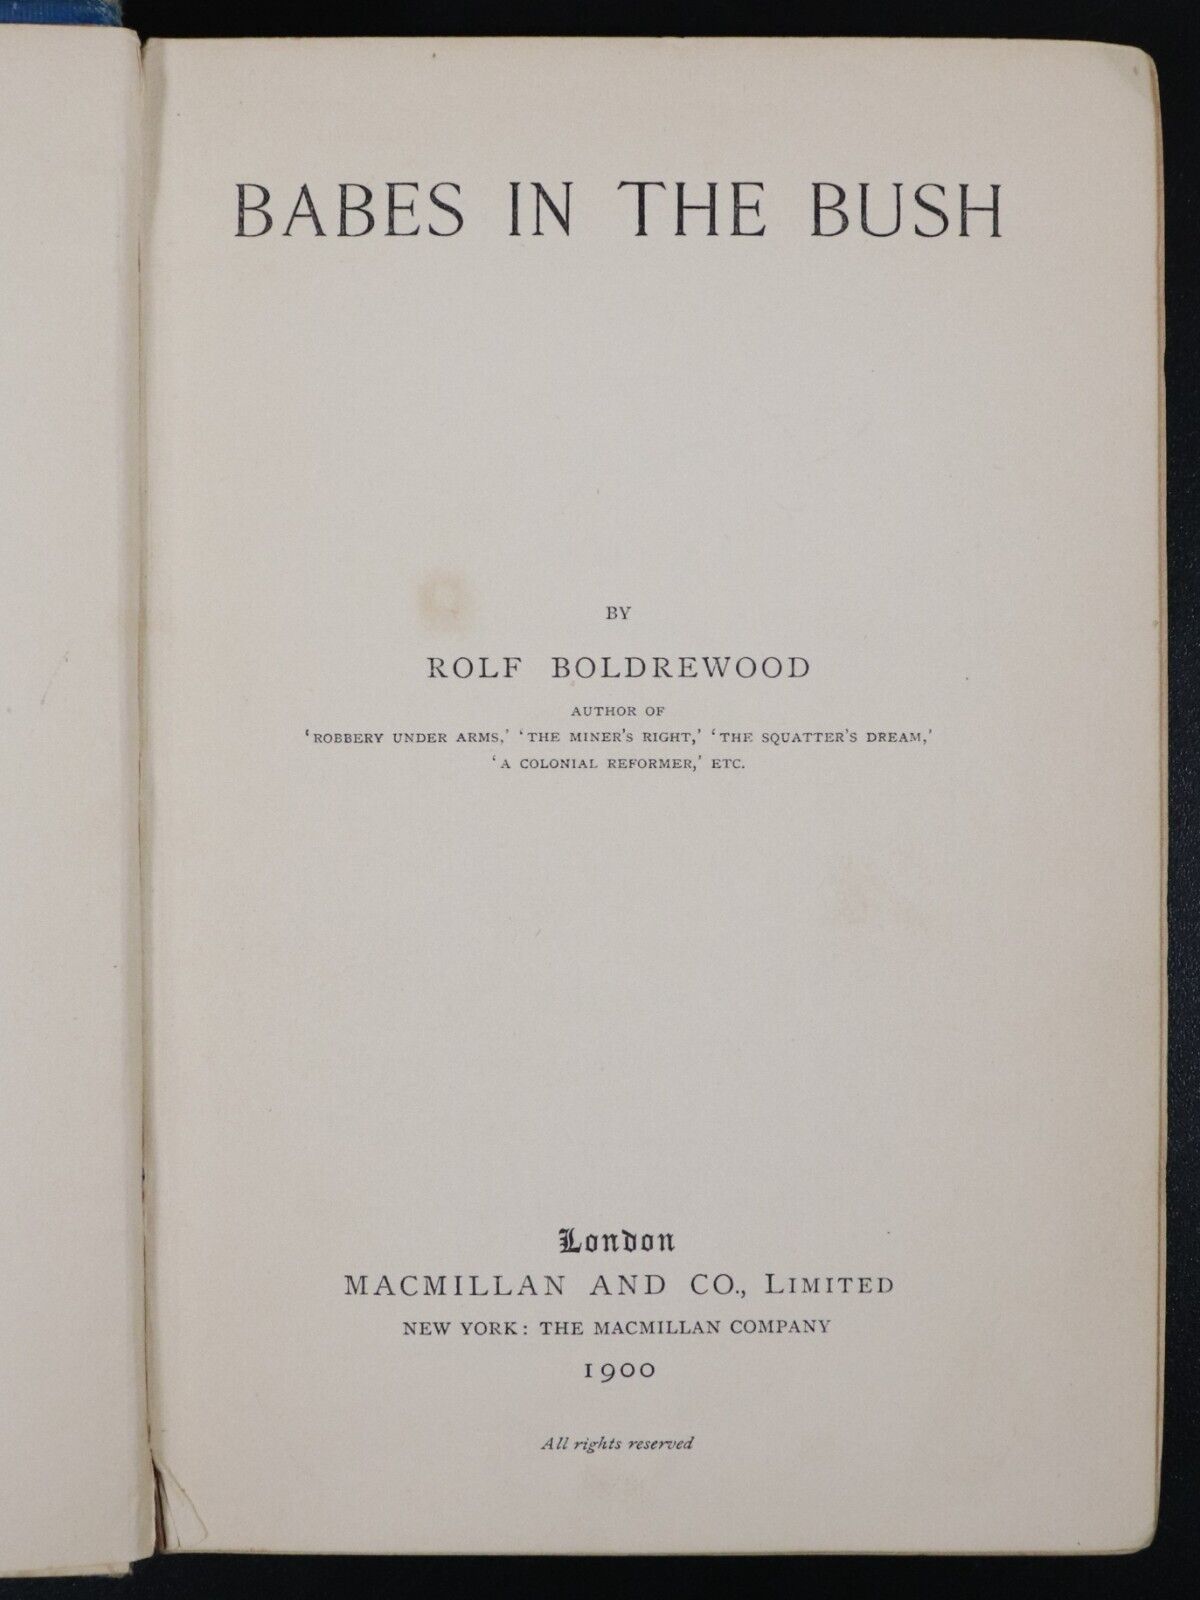 1900 Babes In The Bush by Rolf Boldrewood Antique Australian Bush Fiction Book